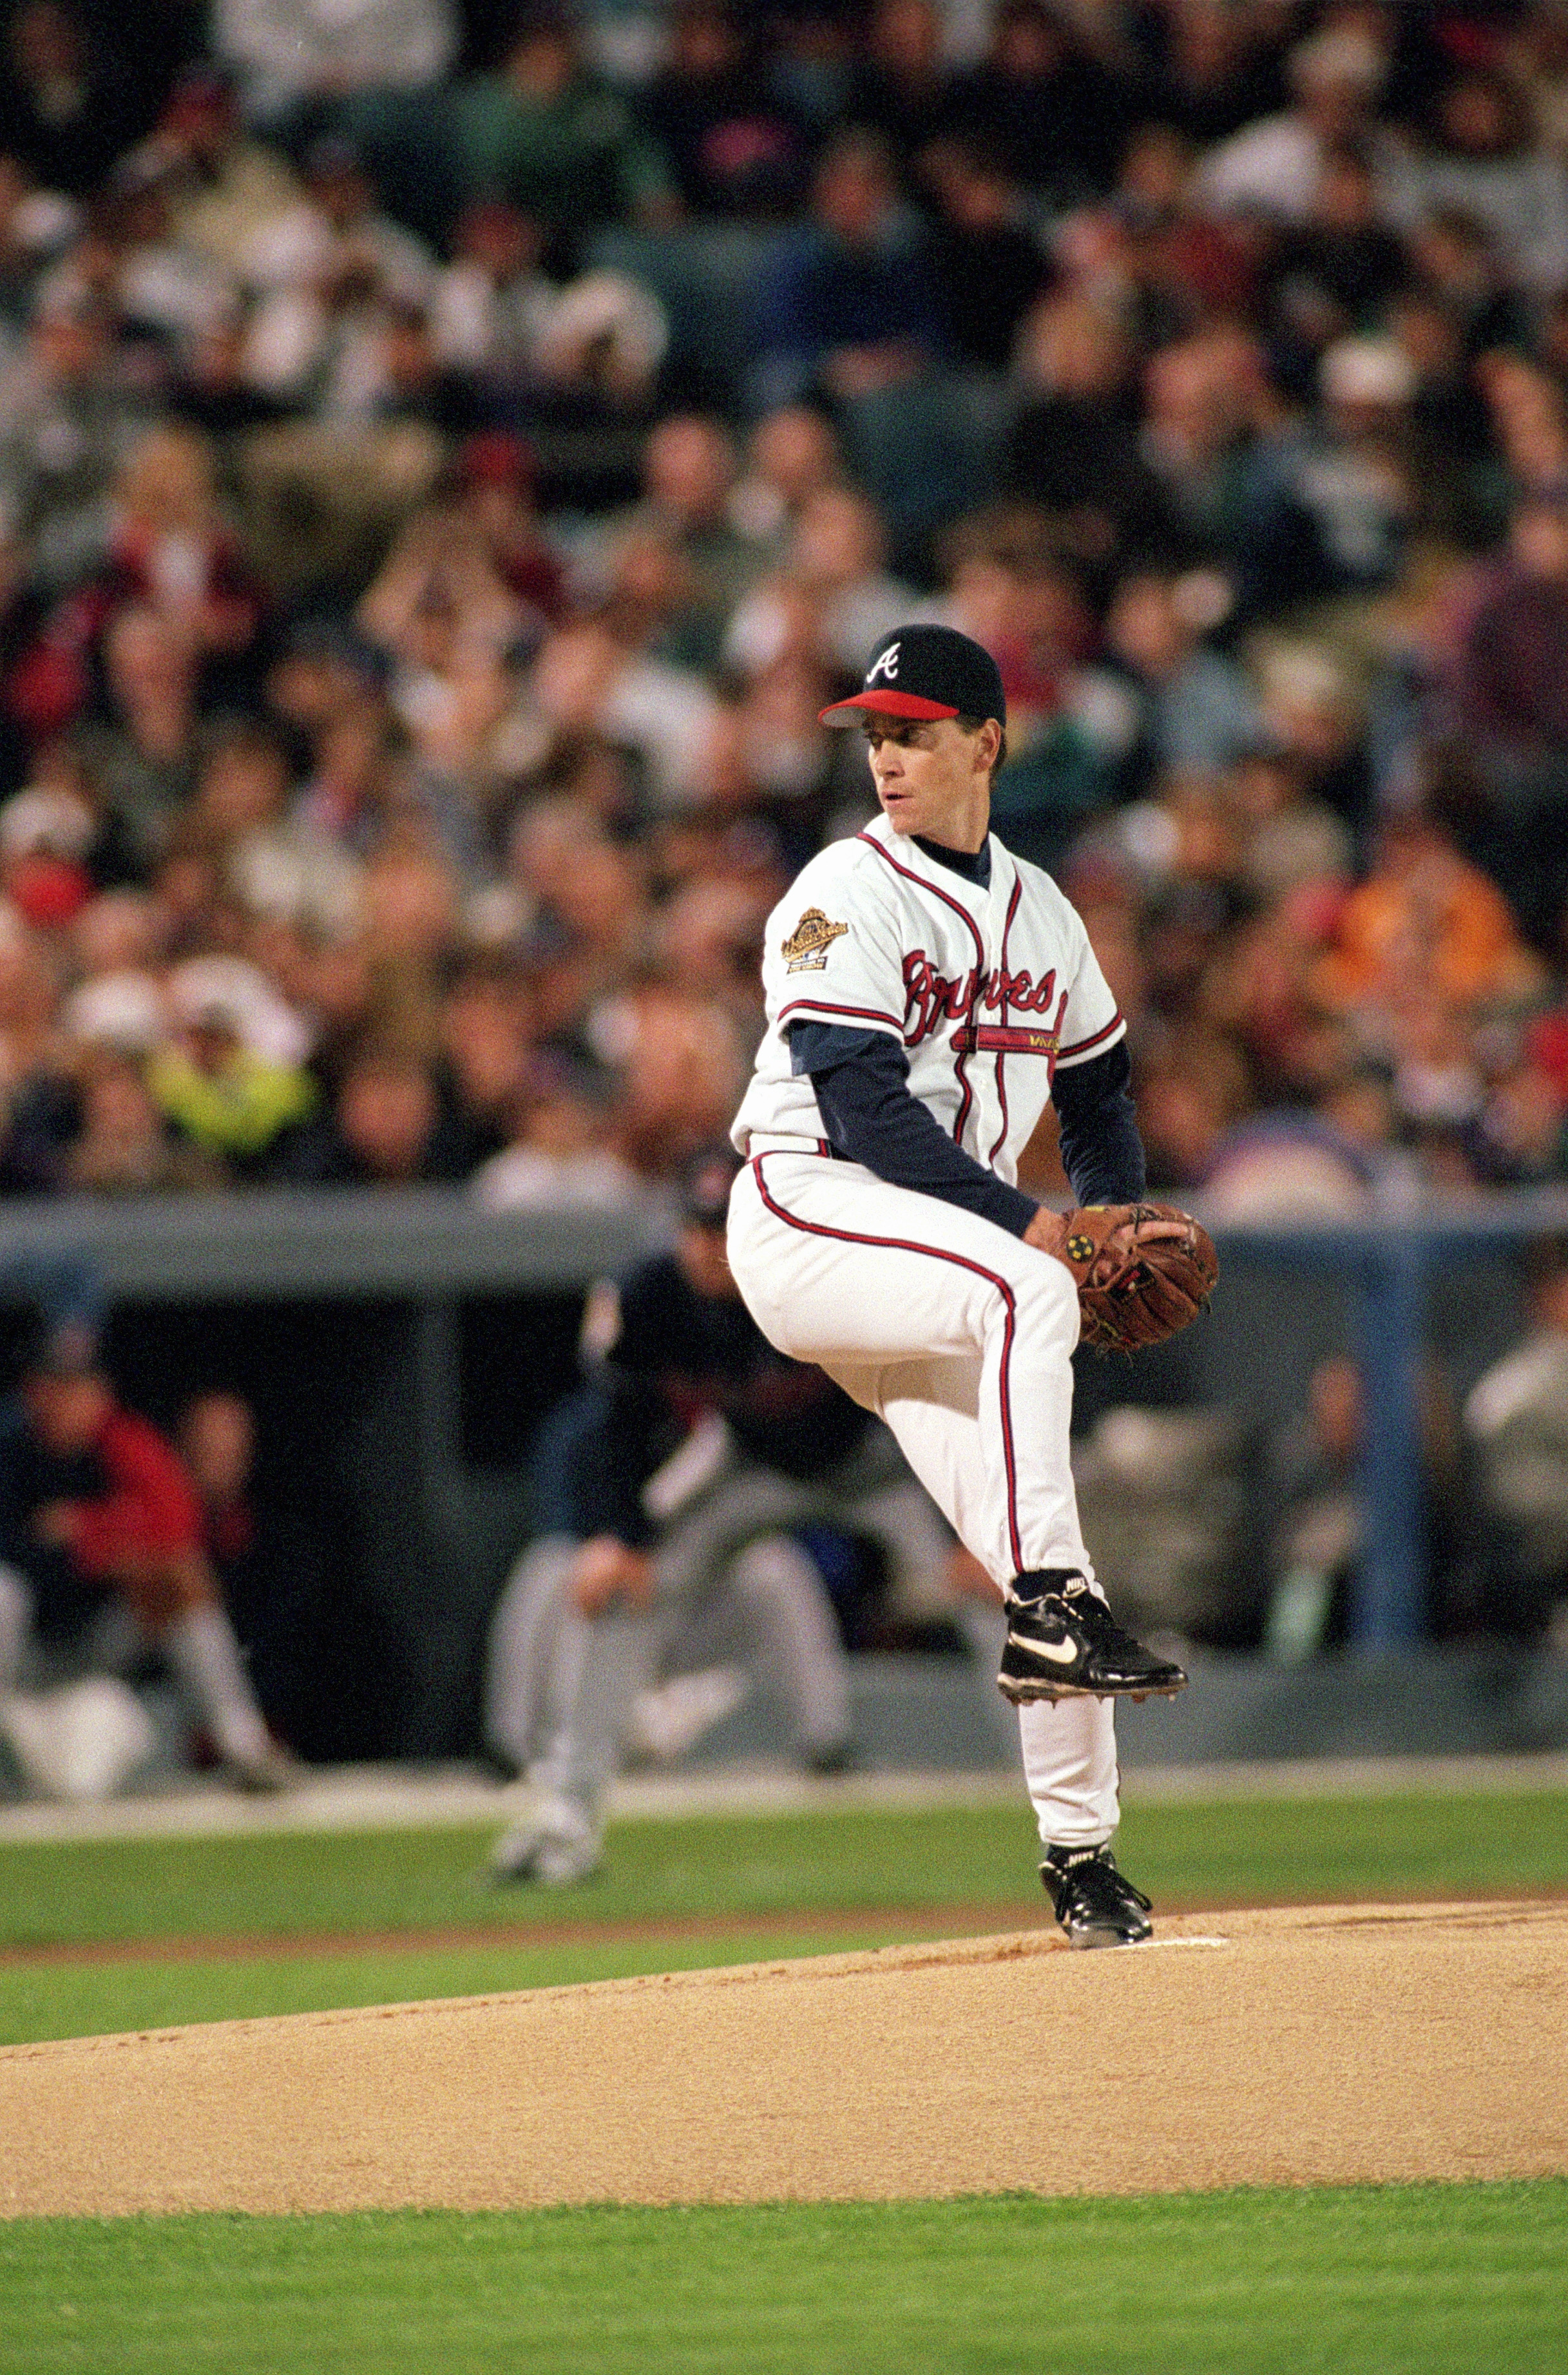 1995 World Series, Game 6: Braves @ Indians 